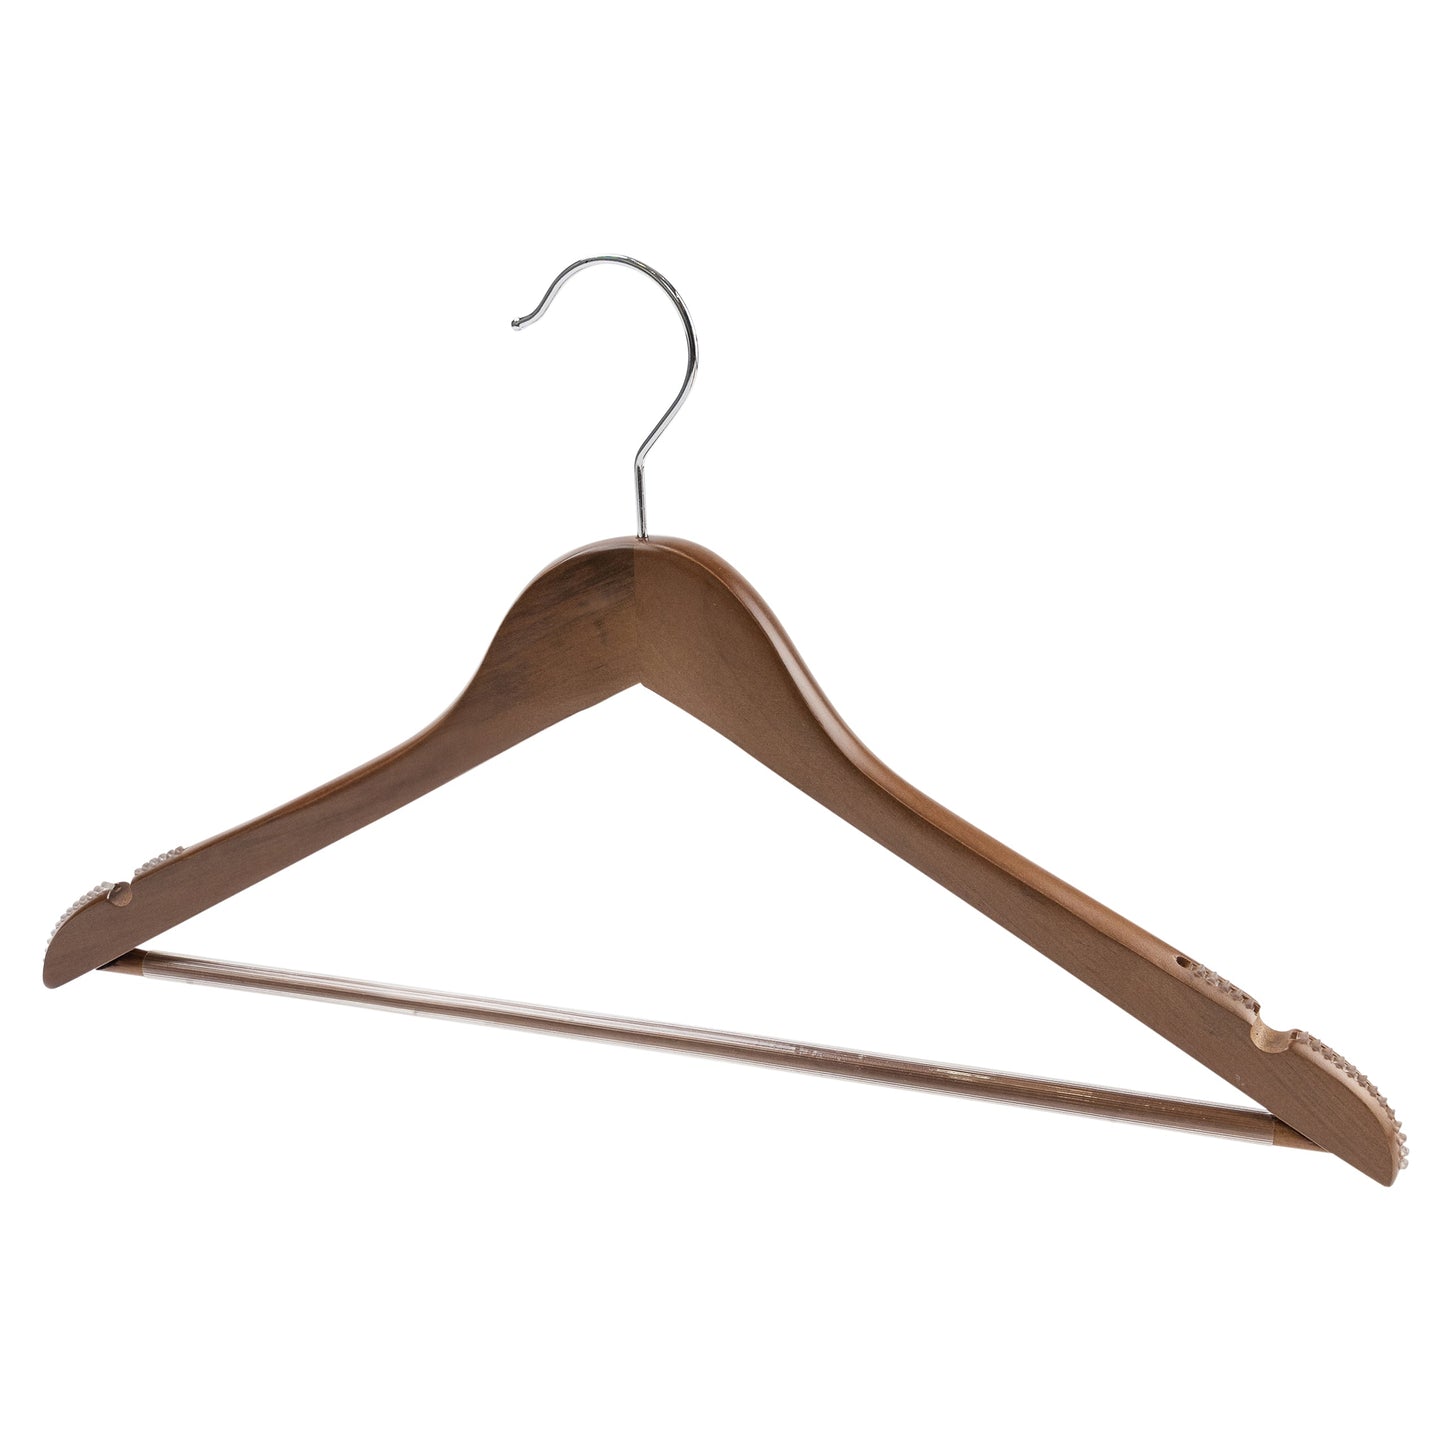 43cm Walnut Wooden Coat Hanger With Bar 14mm thick With Soft Rubber Sold in 25/50/100 - Rackshop Australia